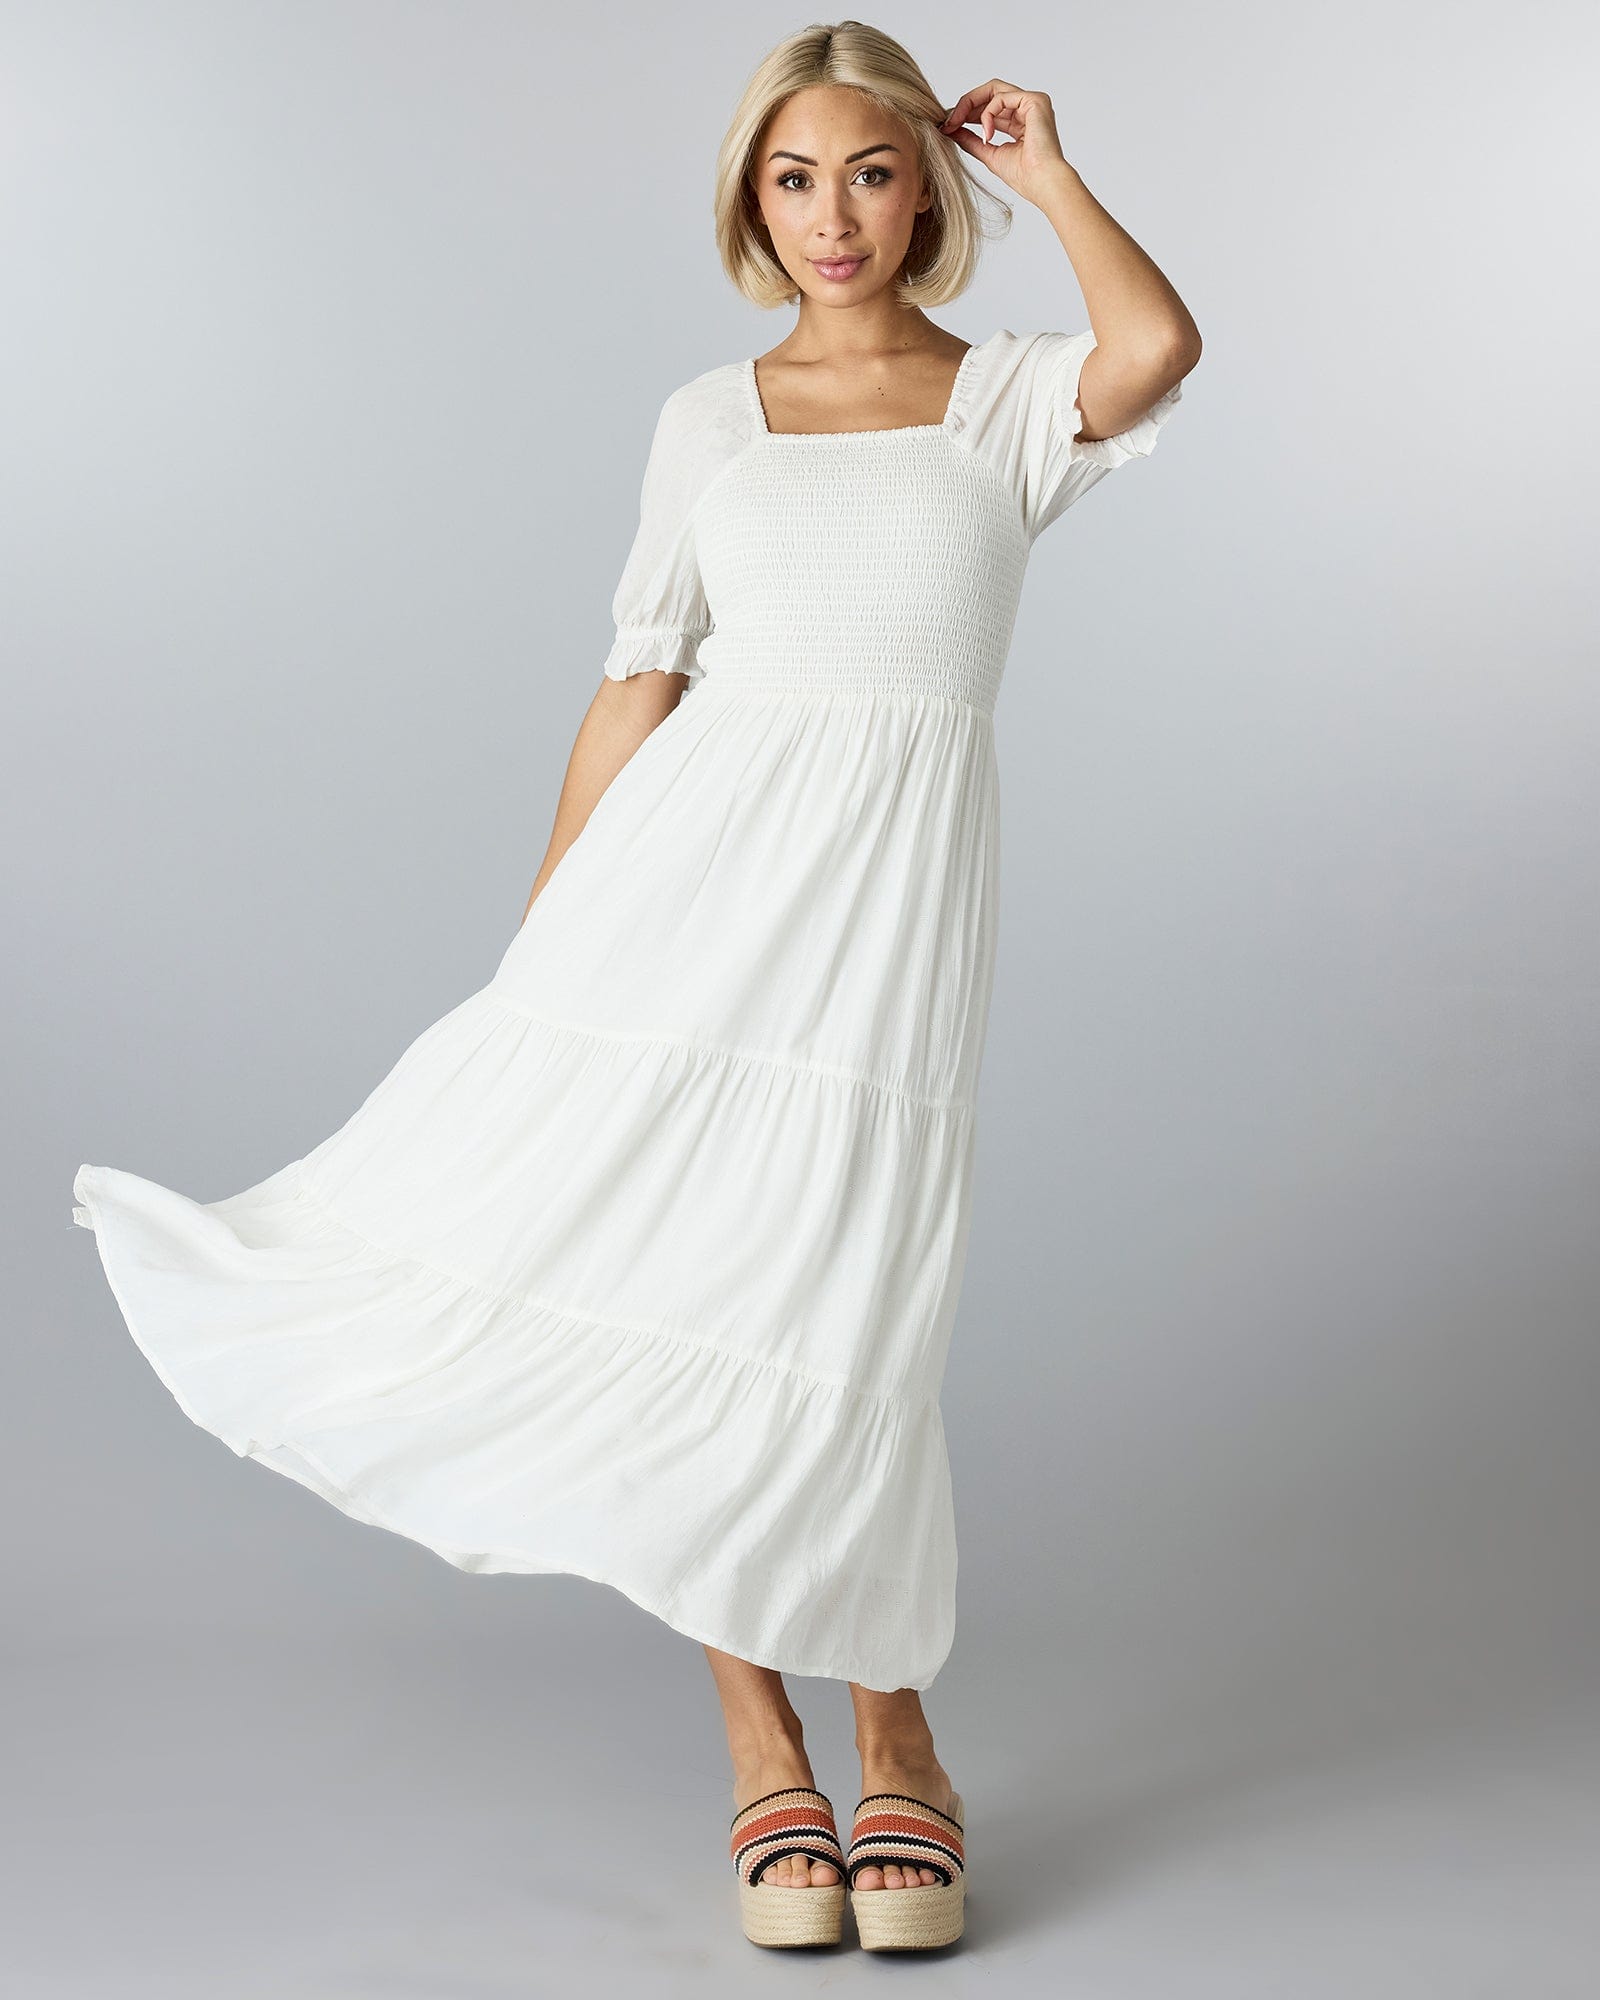 Woman in a white, half sleeved dress with a square neckline and tiers down the skirt.